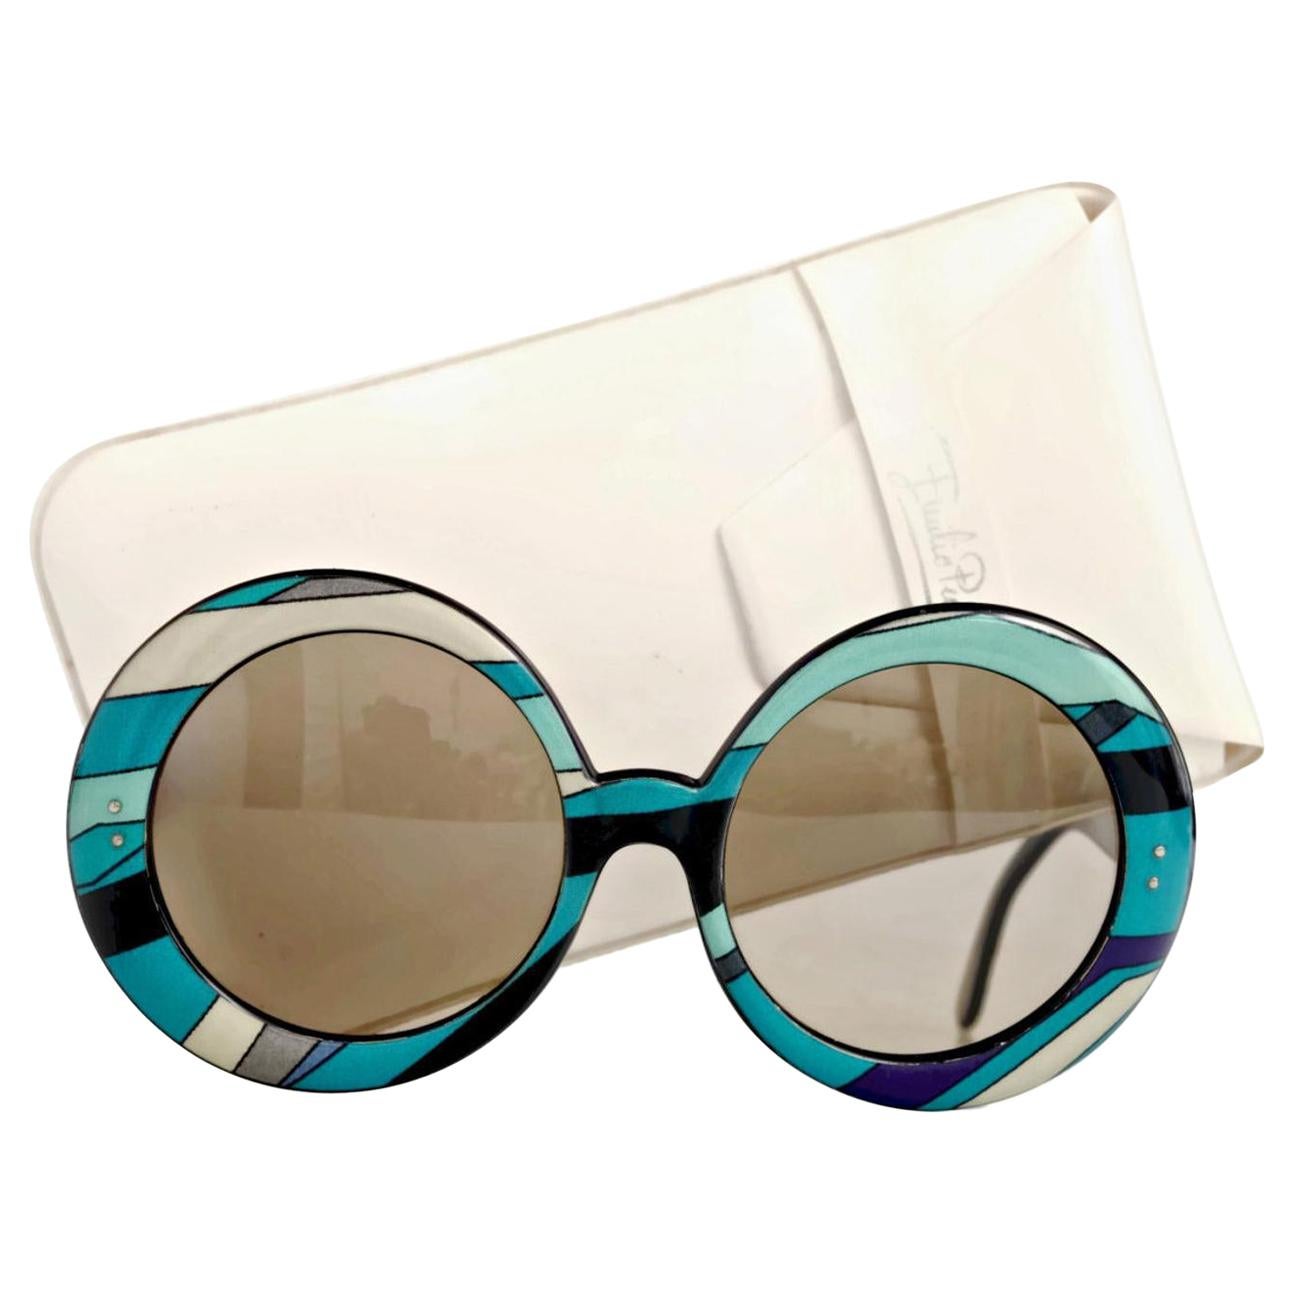 Vintage EMILIO PUCCI Oversized Round Psychedelic Sunglasses